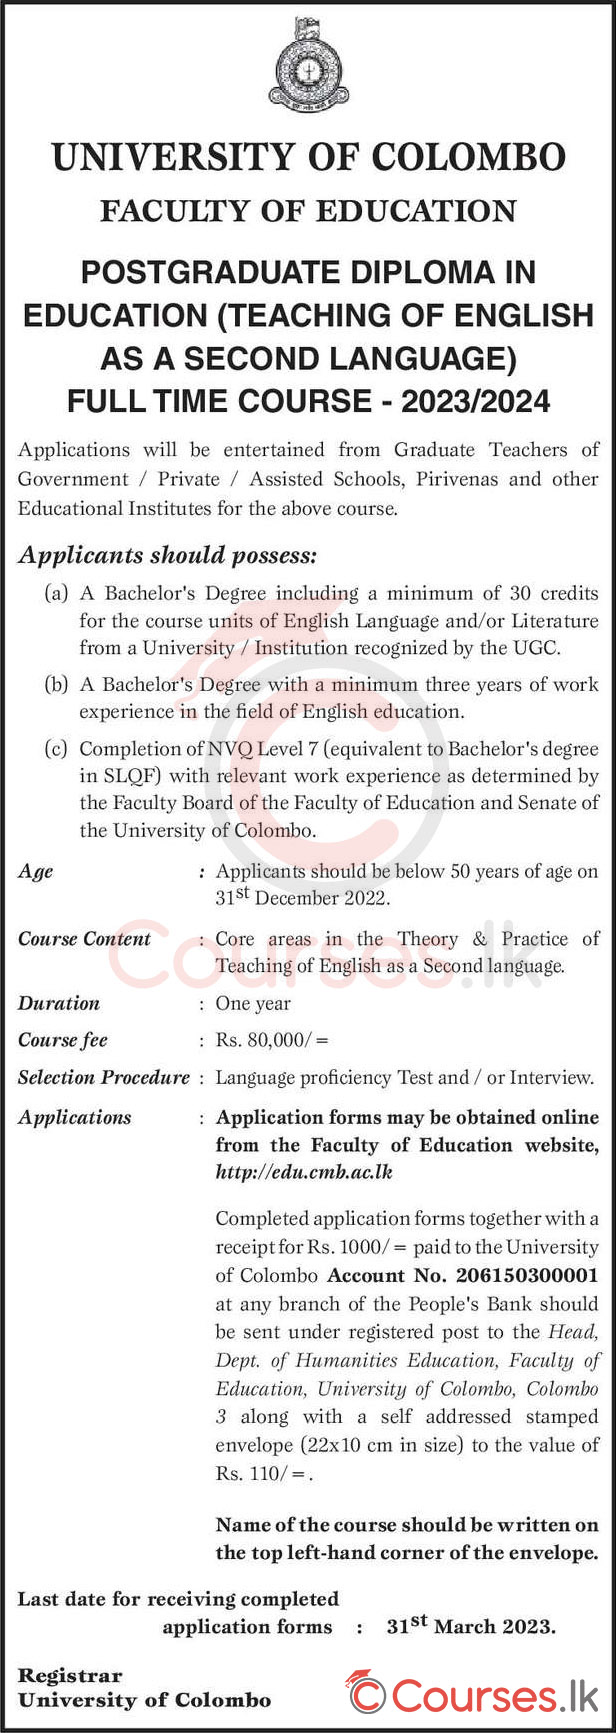 PGDE (Teaching of English as a Second Language - TESL) 2023/24 - University of Colombo